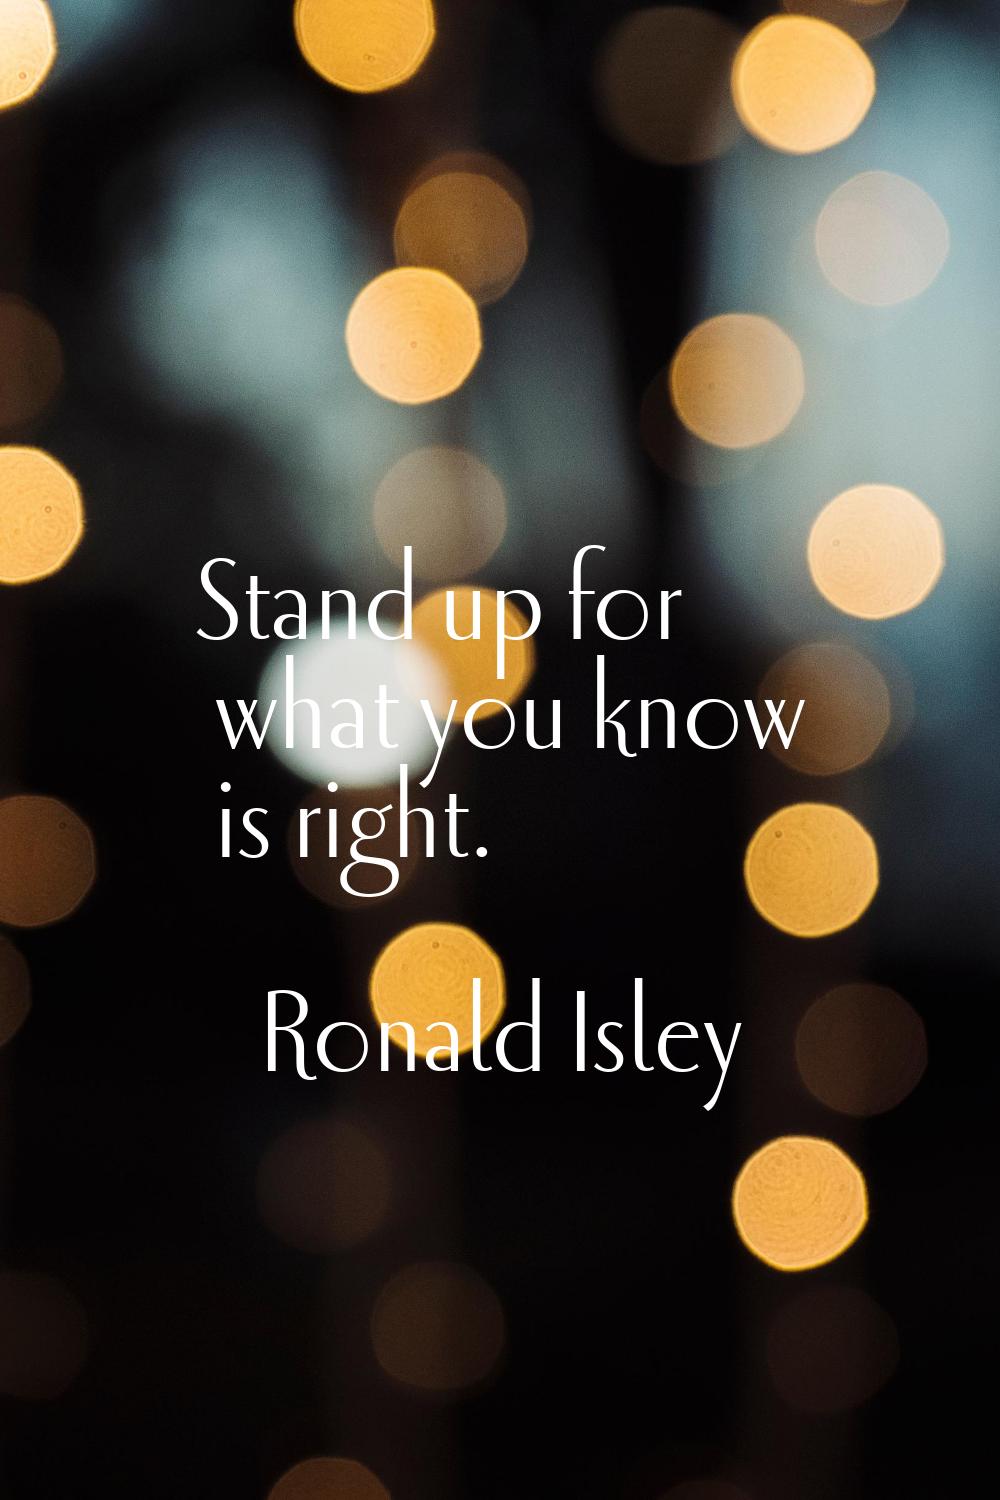 Stand up for what you know is right.